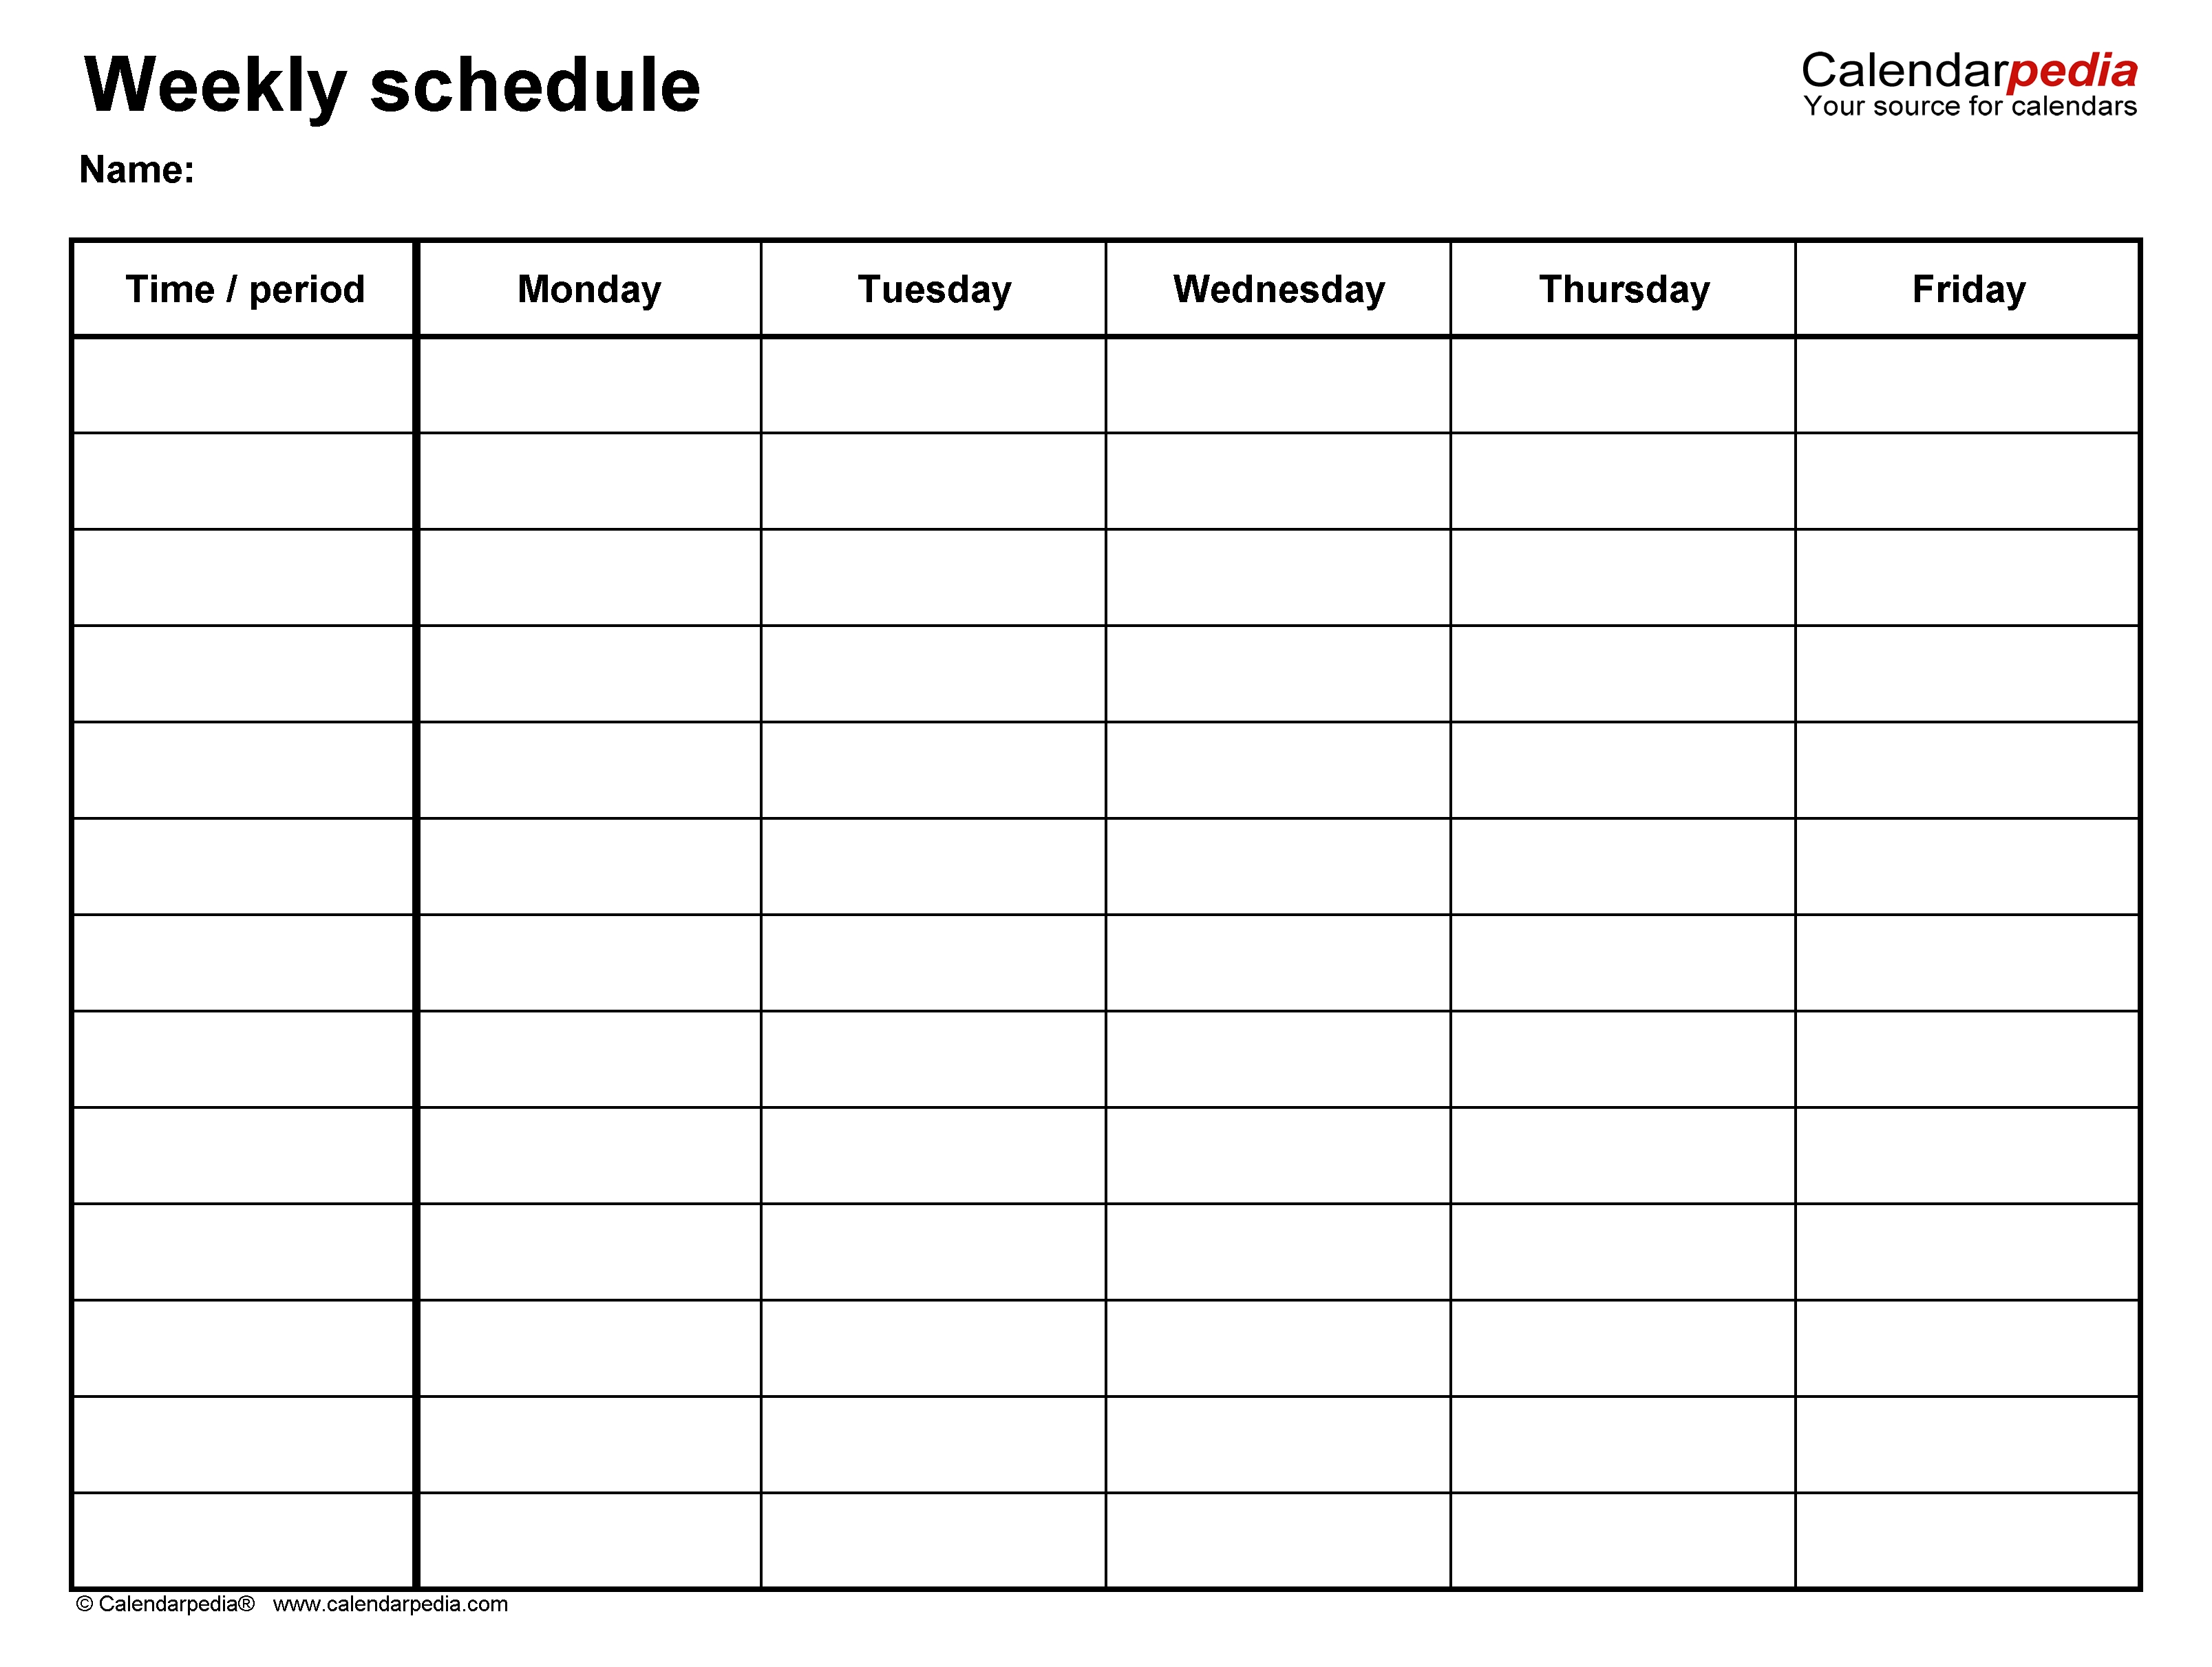 Free Weekly Schedule Templates For Word - 18 Templates  Editable Weekly Schedule